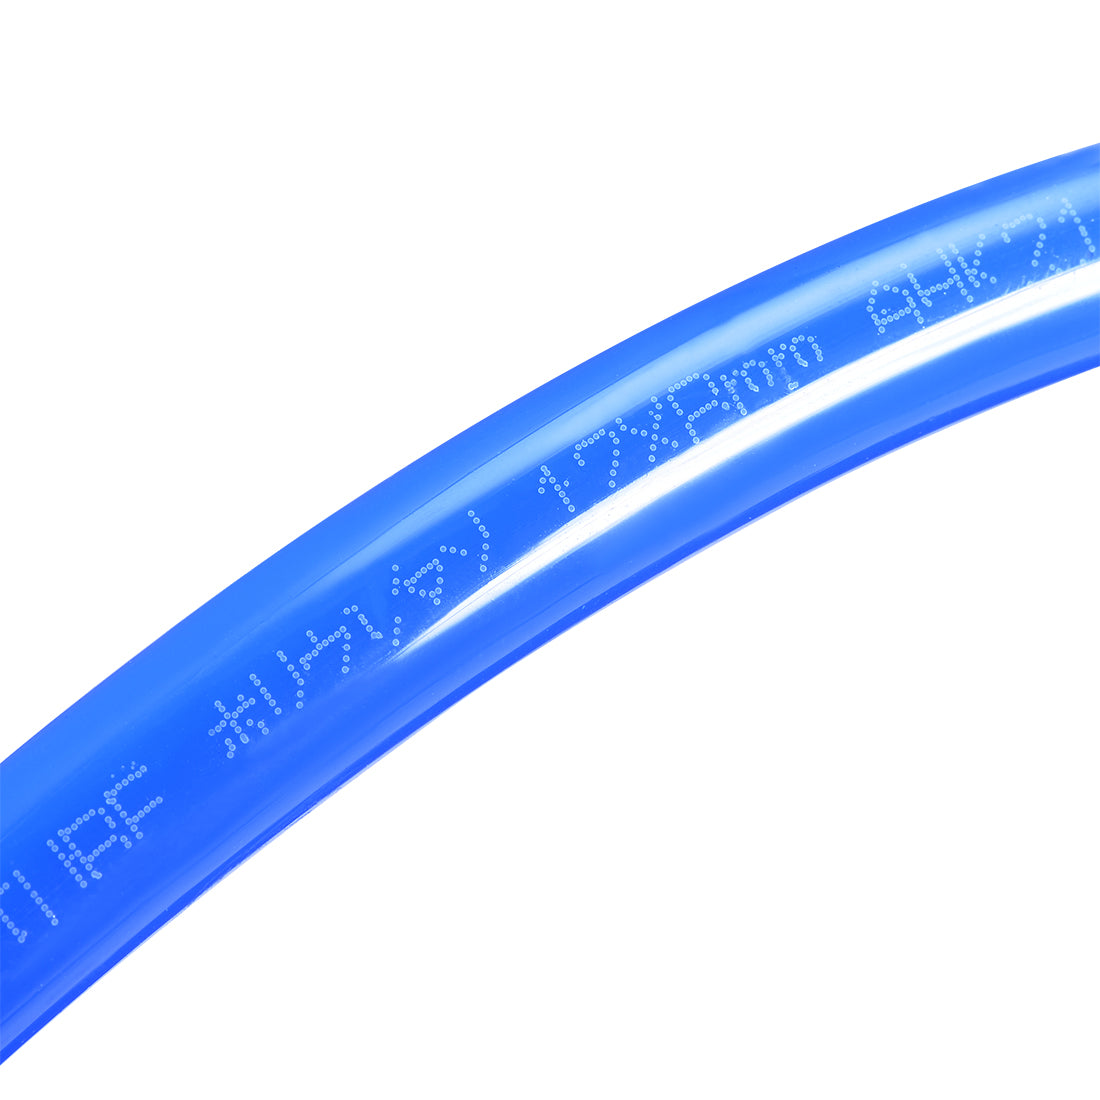 uxcell Uxcell Pneumatic Hose Tubing,12mm OD 8mm ID,Polyurethane PU Air Hose Pipe Tube,1 Meter 3.28ft,Blue